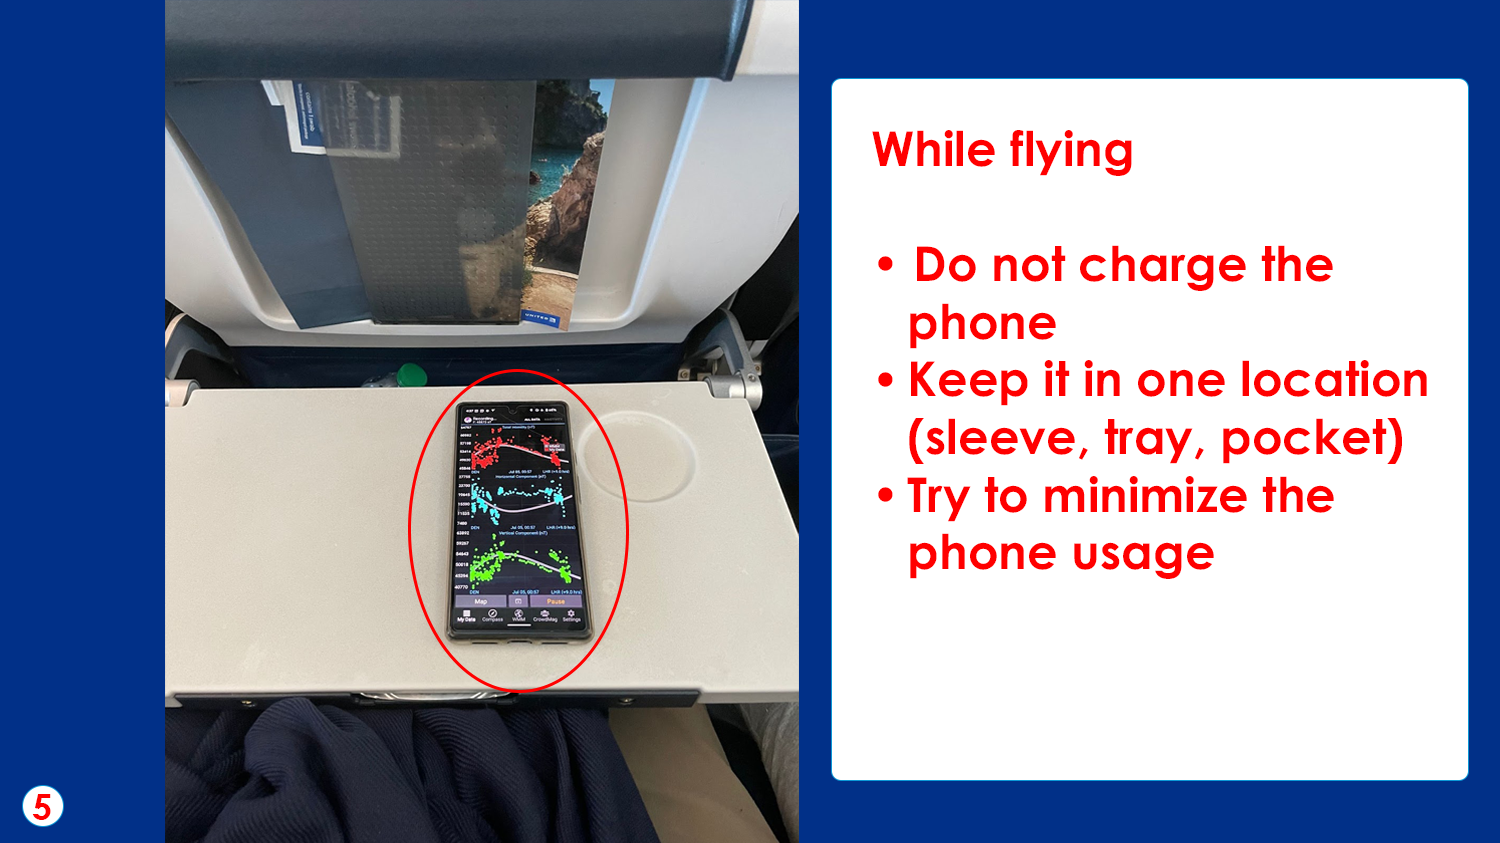 Photo of phone sitting on an airplane tray table with CrowdMag flight mode open. Text reads, While flying: Do not charge the phone, Keep it in one location (sleeve, tray, pocket), Try to minimize the phone usage.